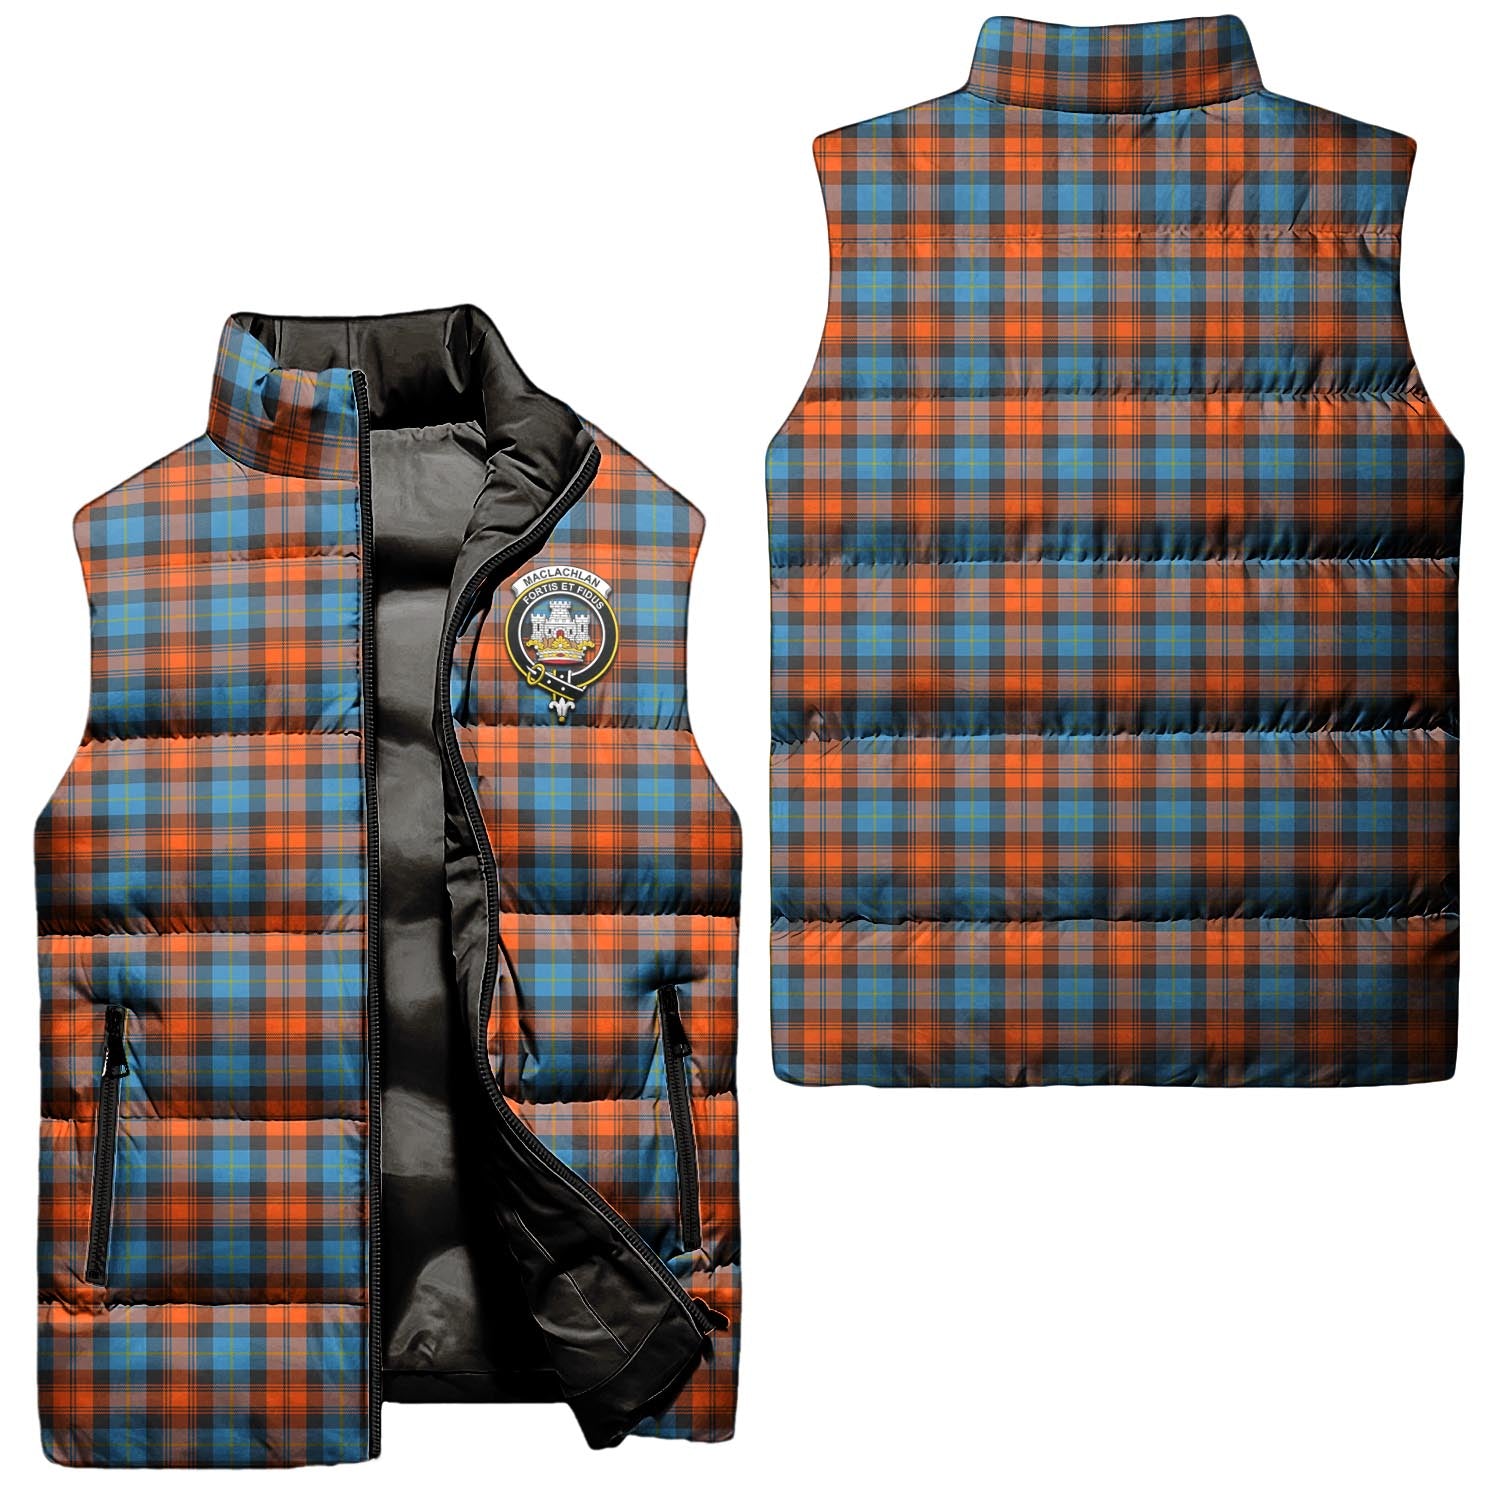 maclachlan-ancient-clan-puffer-vest-family-crest-plaid-sleeveless-down-jacket